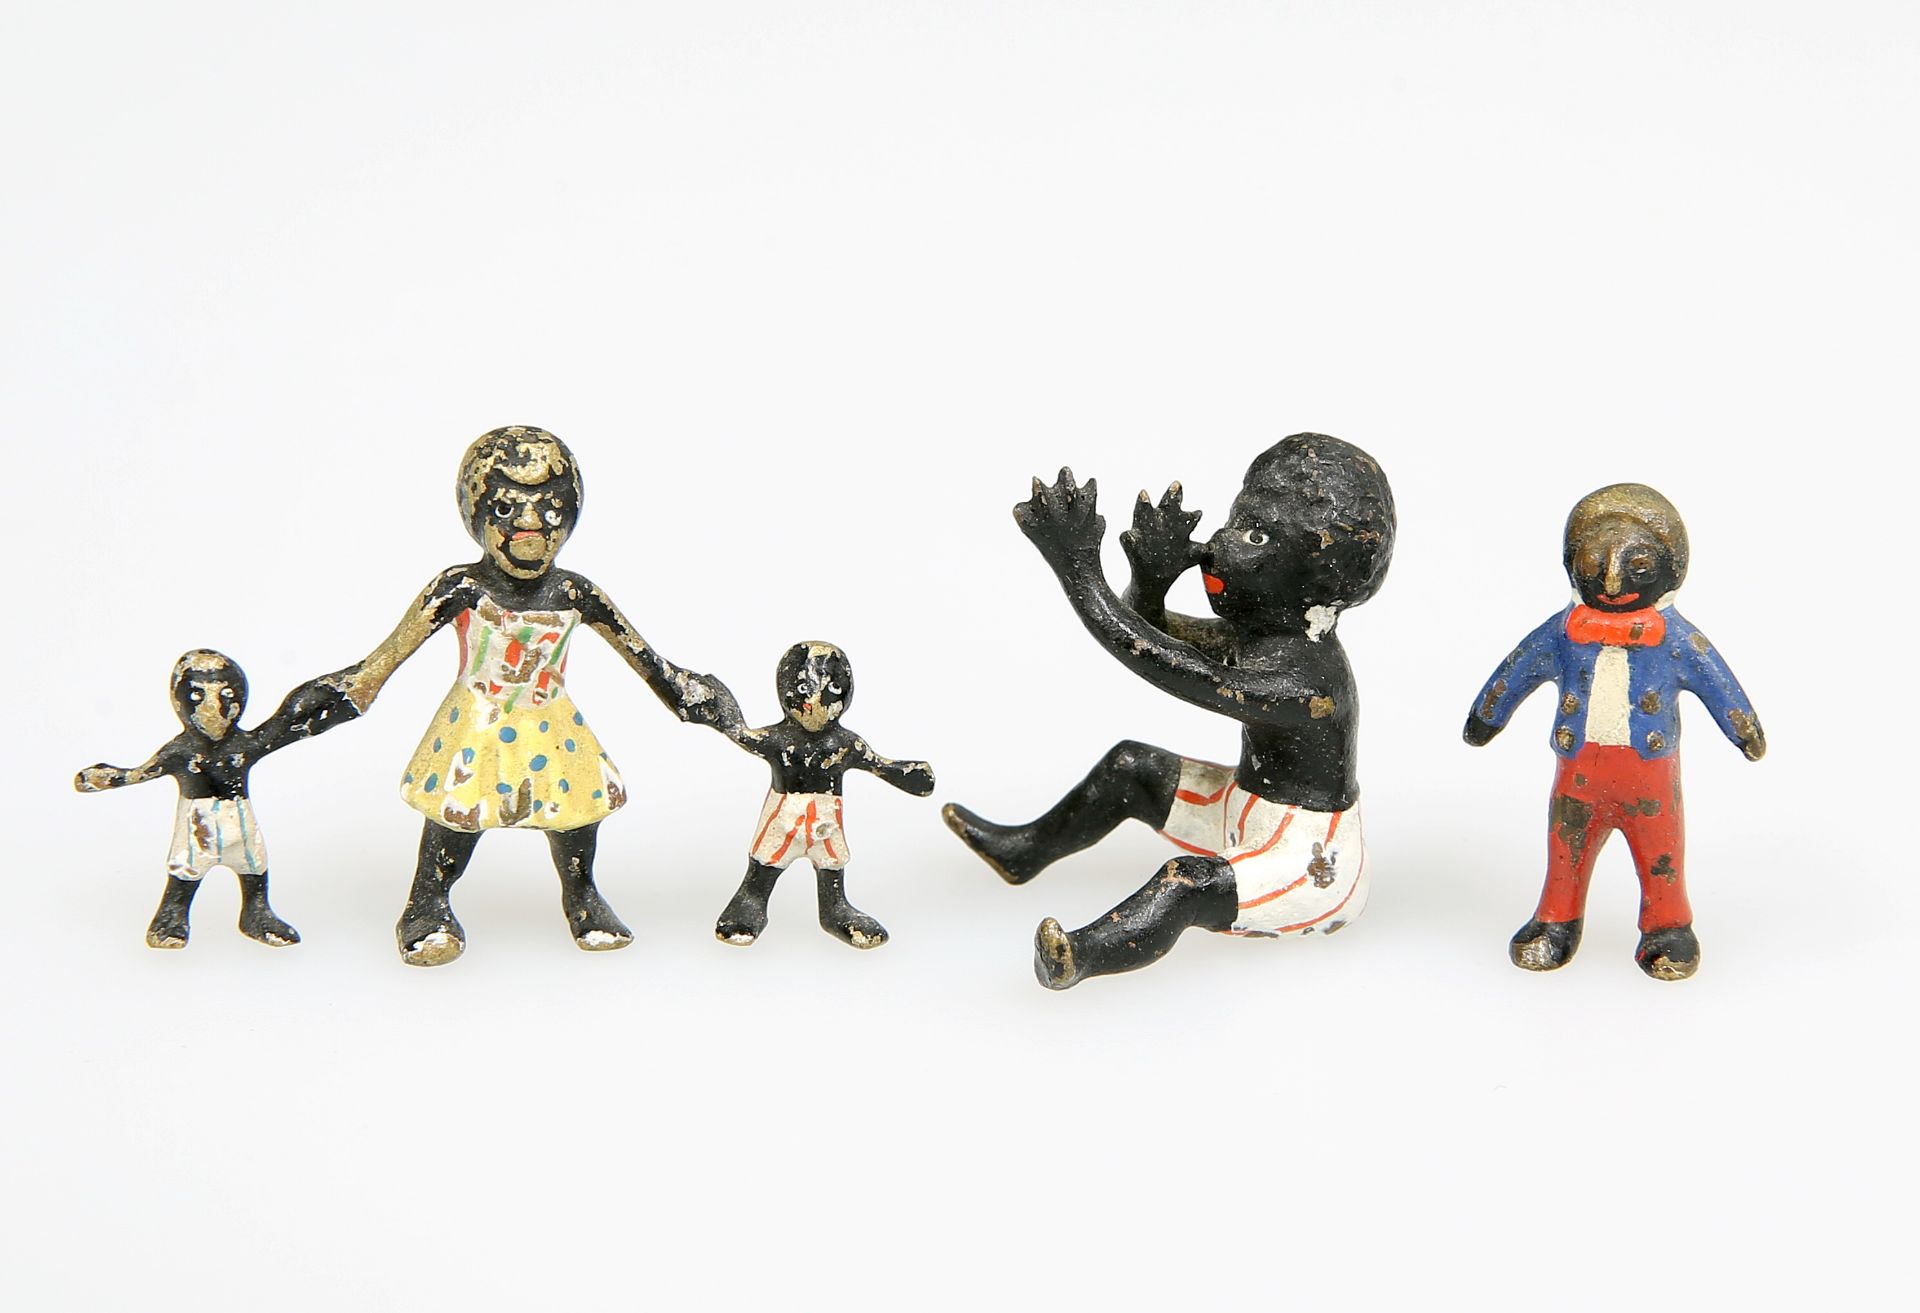 THREE EARLY 20TH CENTURY COLD PAINTED BRONZE FIGURES OF BLACK AMERICANA